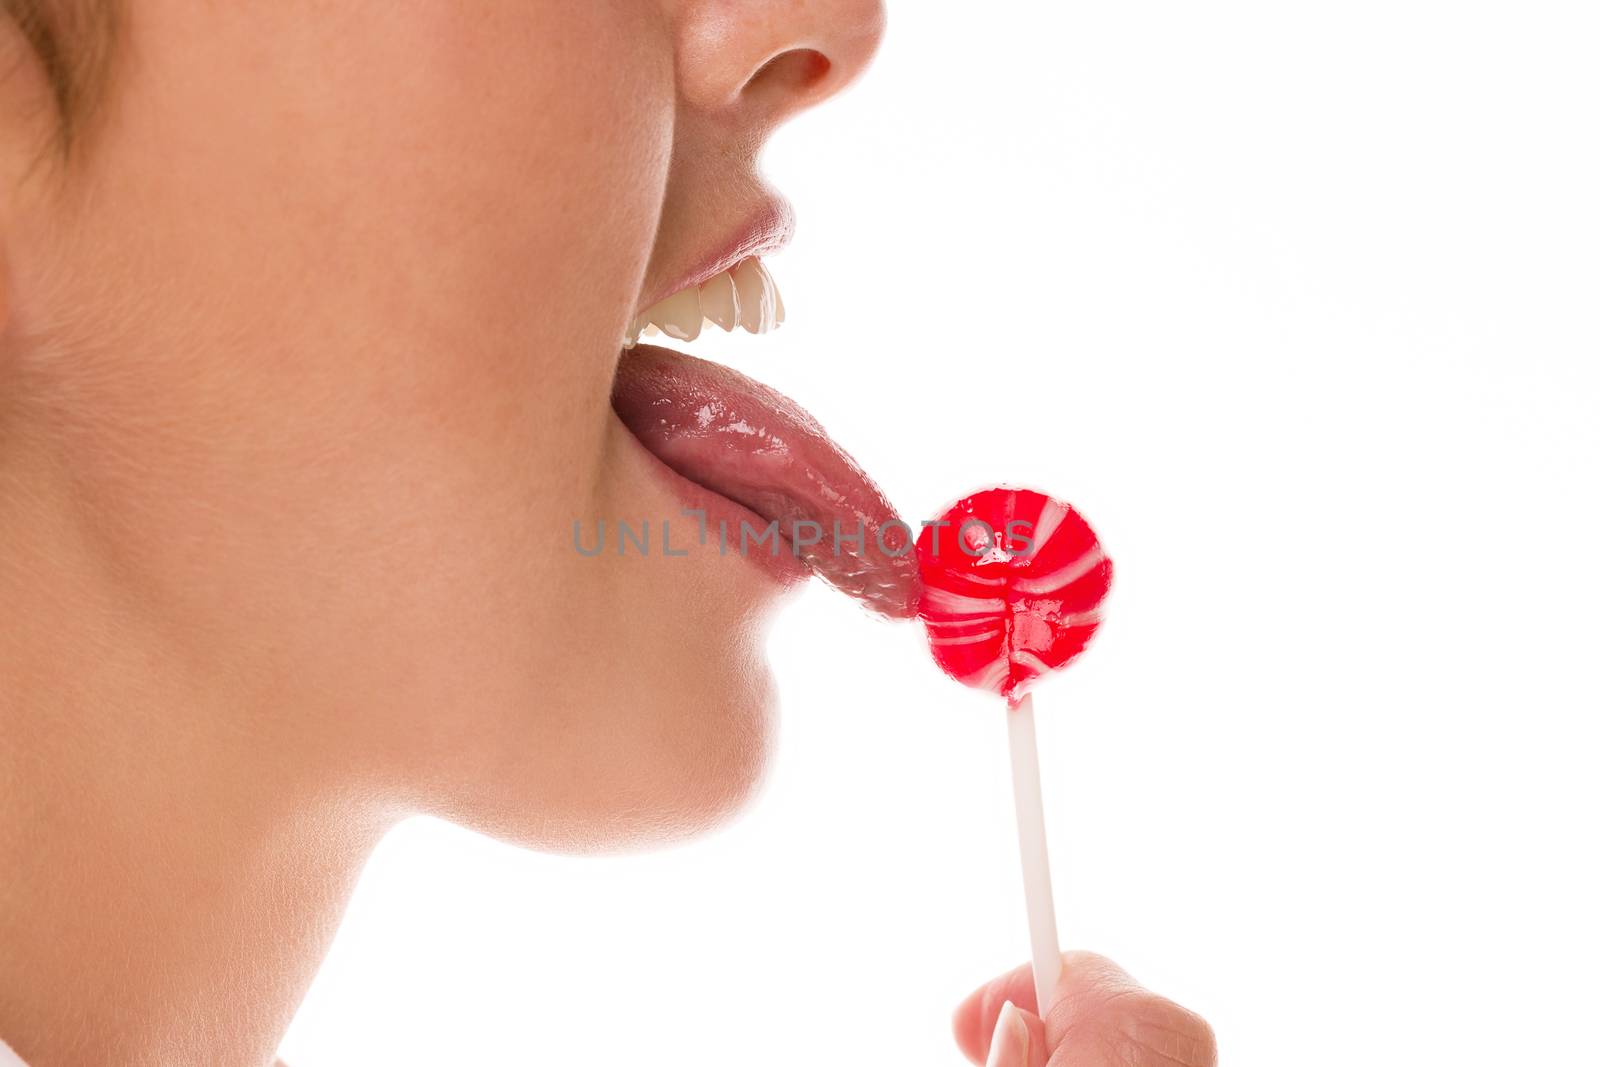 tongue licking lollipop by RobStark